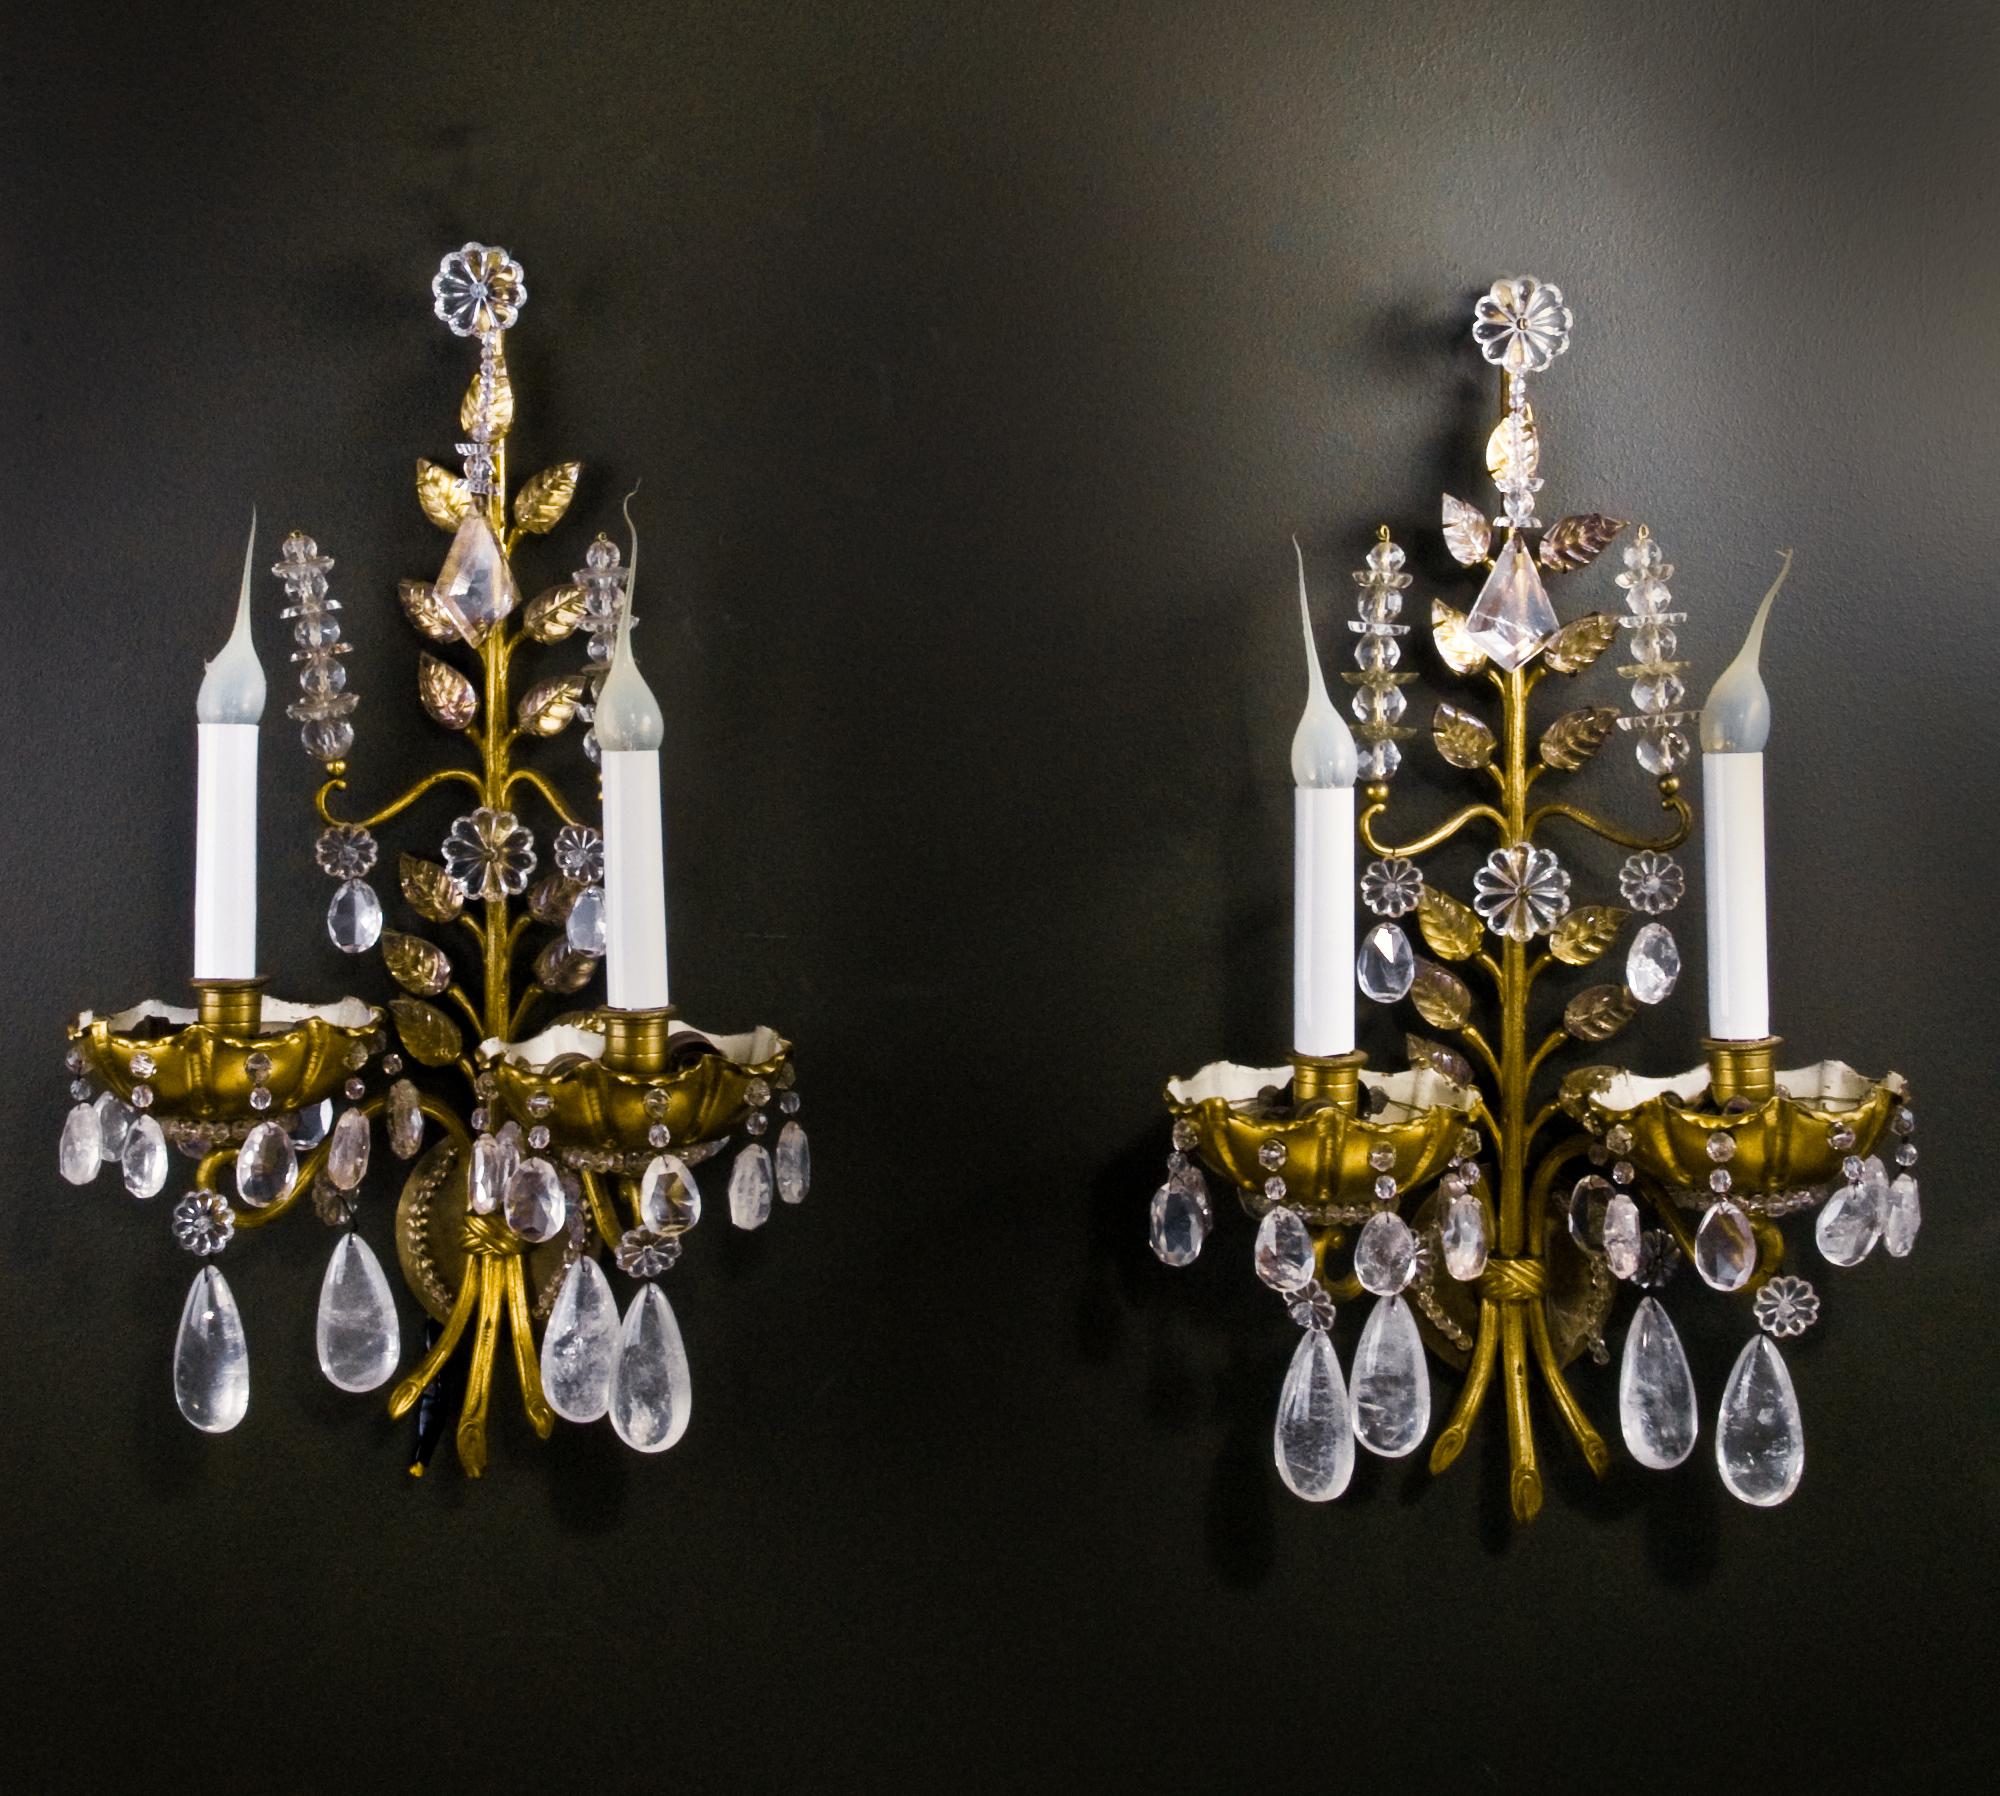 A pair of fine French Louis XVI Baguès style rock crystal, glass and gilt bronze double light wall sconces embellished with rock crystal prisms, glass beads and glass leaves.